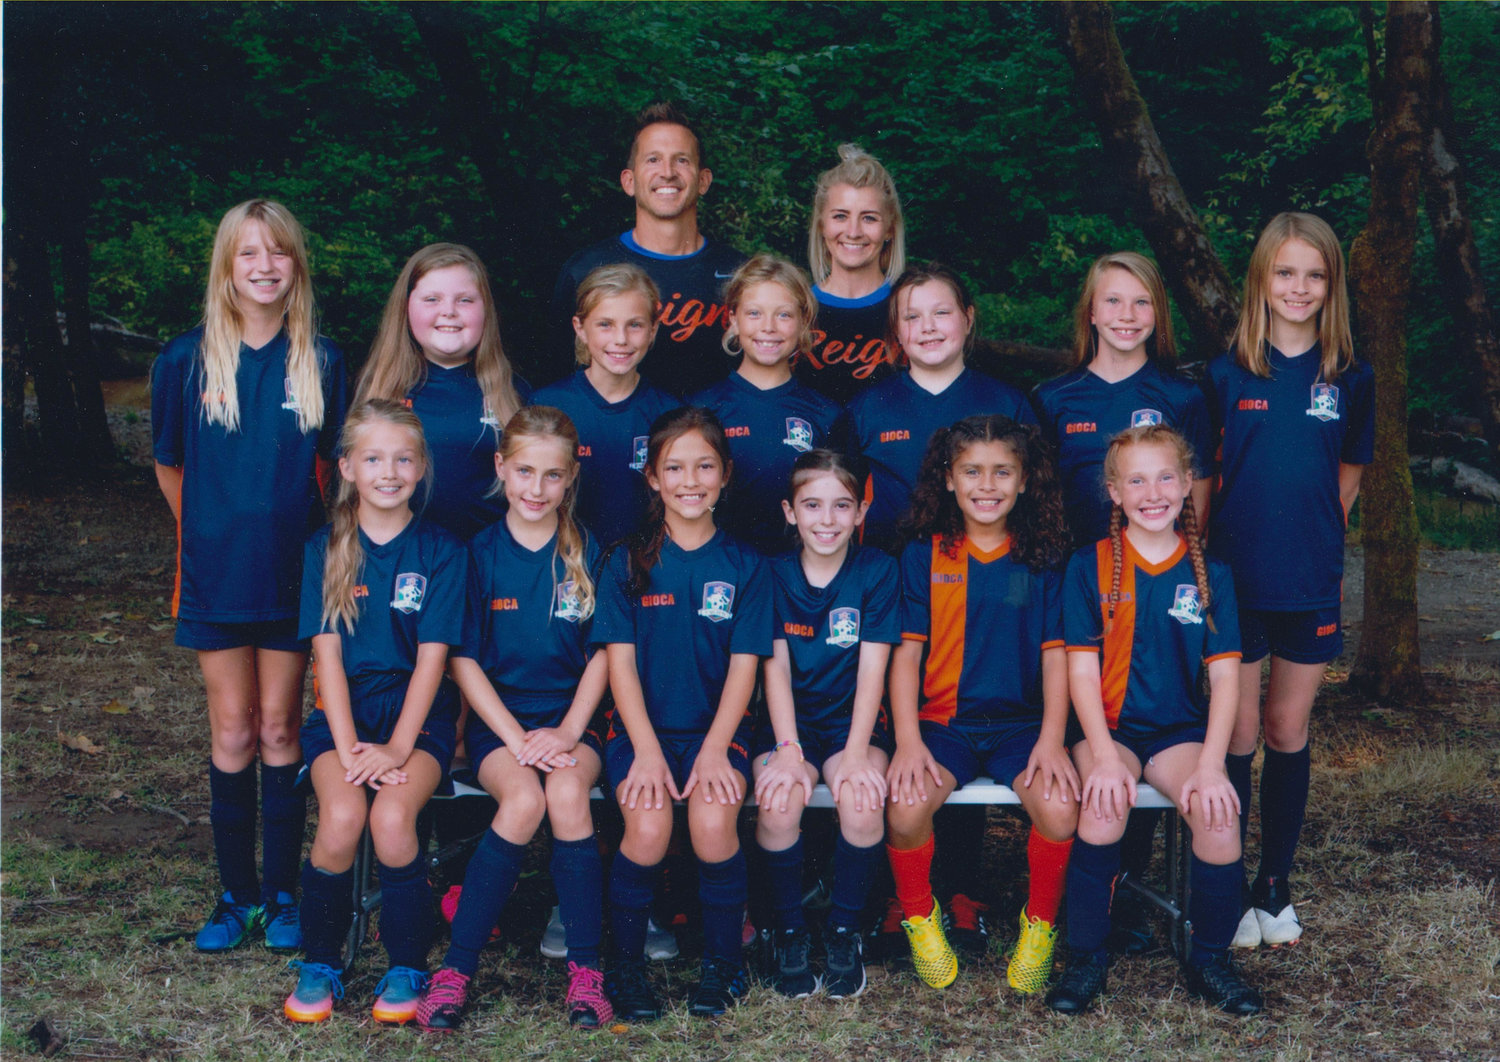 The U-11 Reign is pictured.